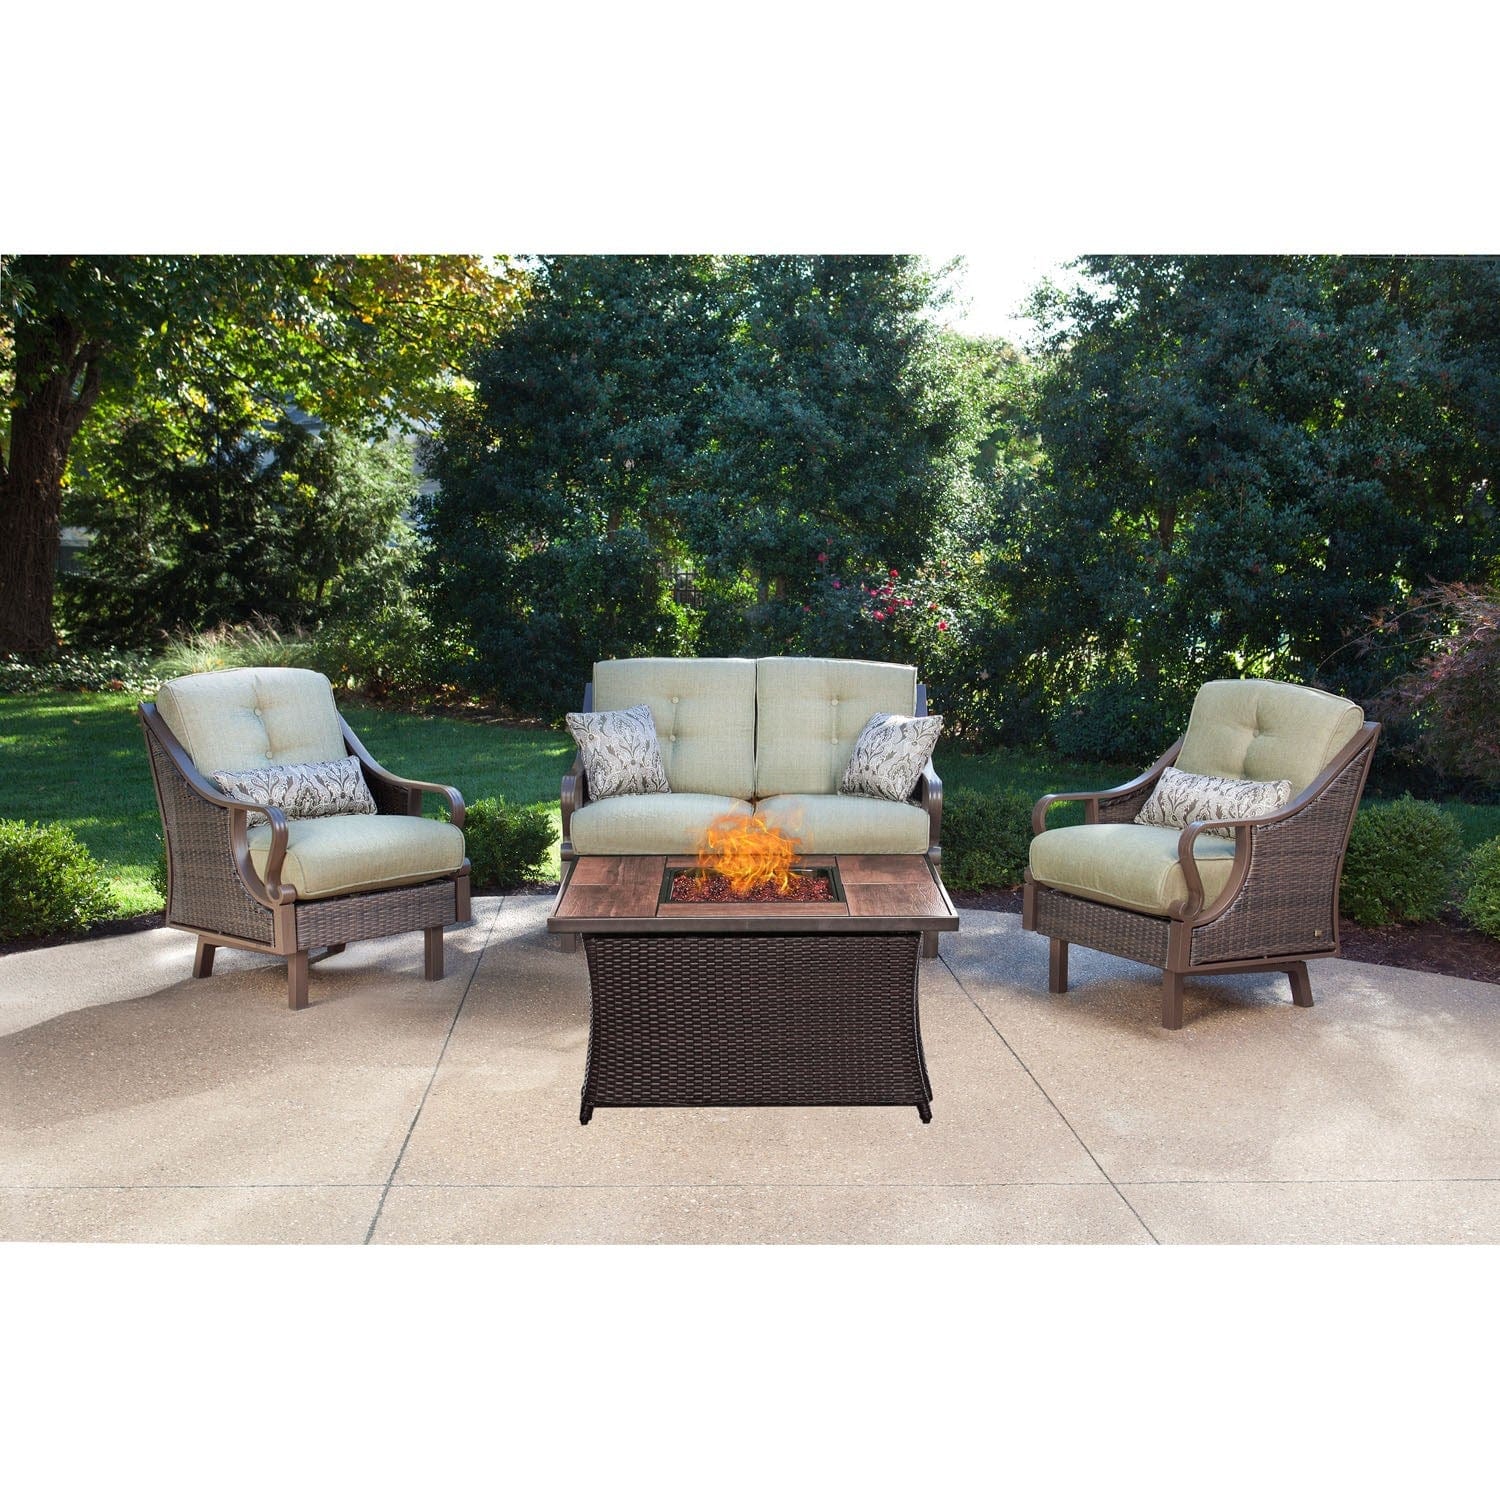 Hanover Fire Pit Chat Set Hanover - Ventura 4-Piece Fire Pit Chat Set | with Wood Grain Tile Top | Brown/Meadow Green | VEN4PCFP-GRN-WG